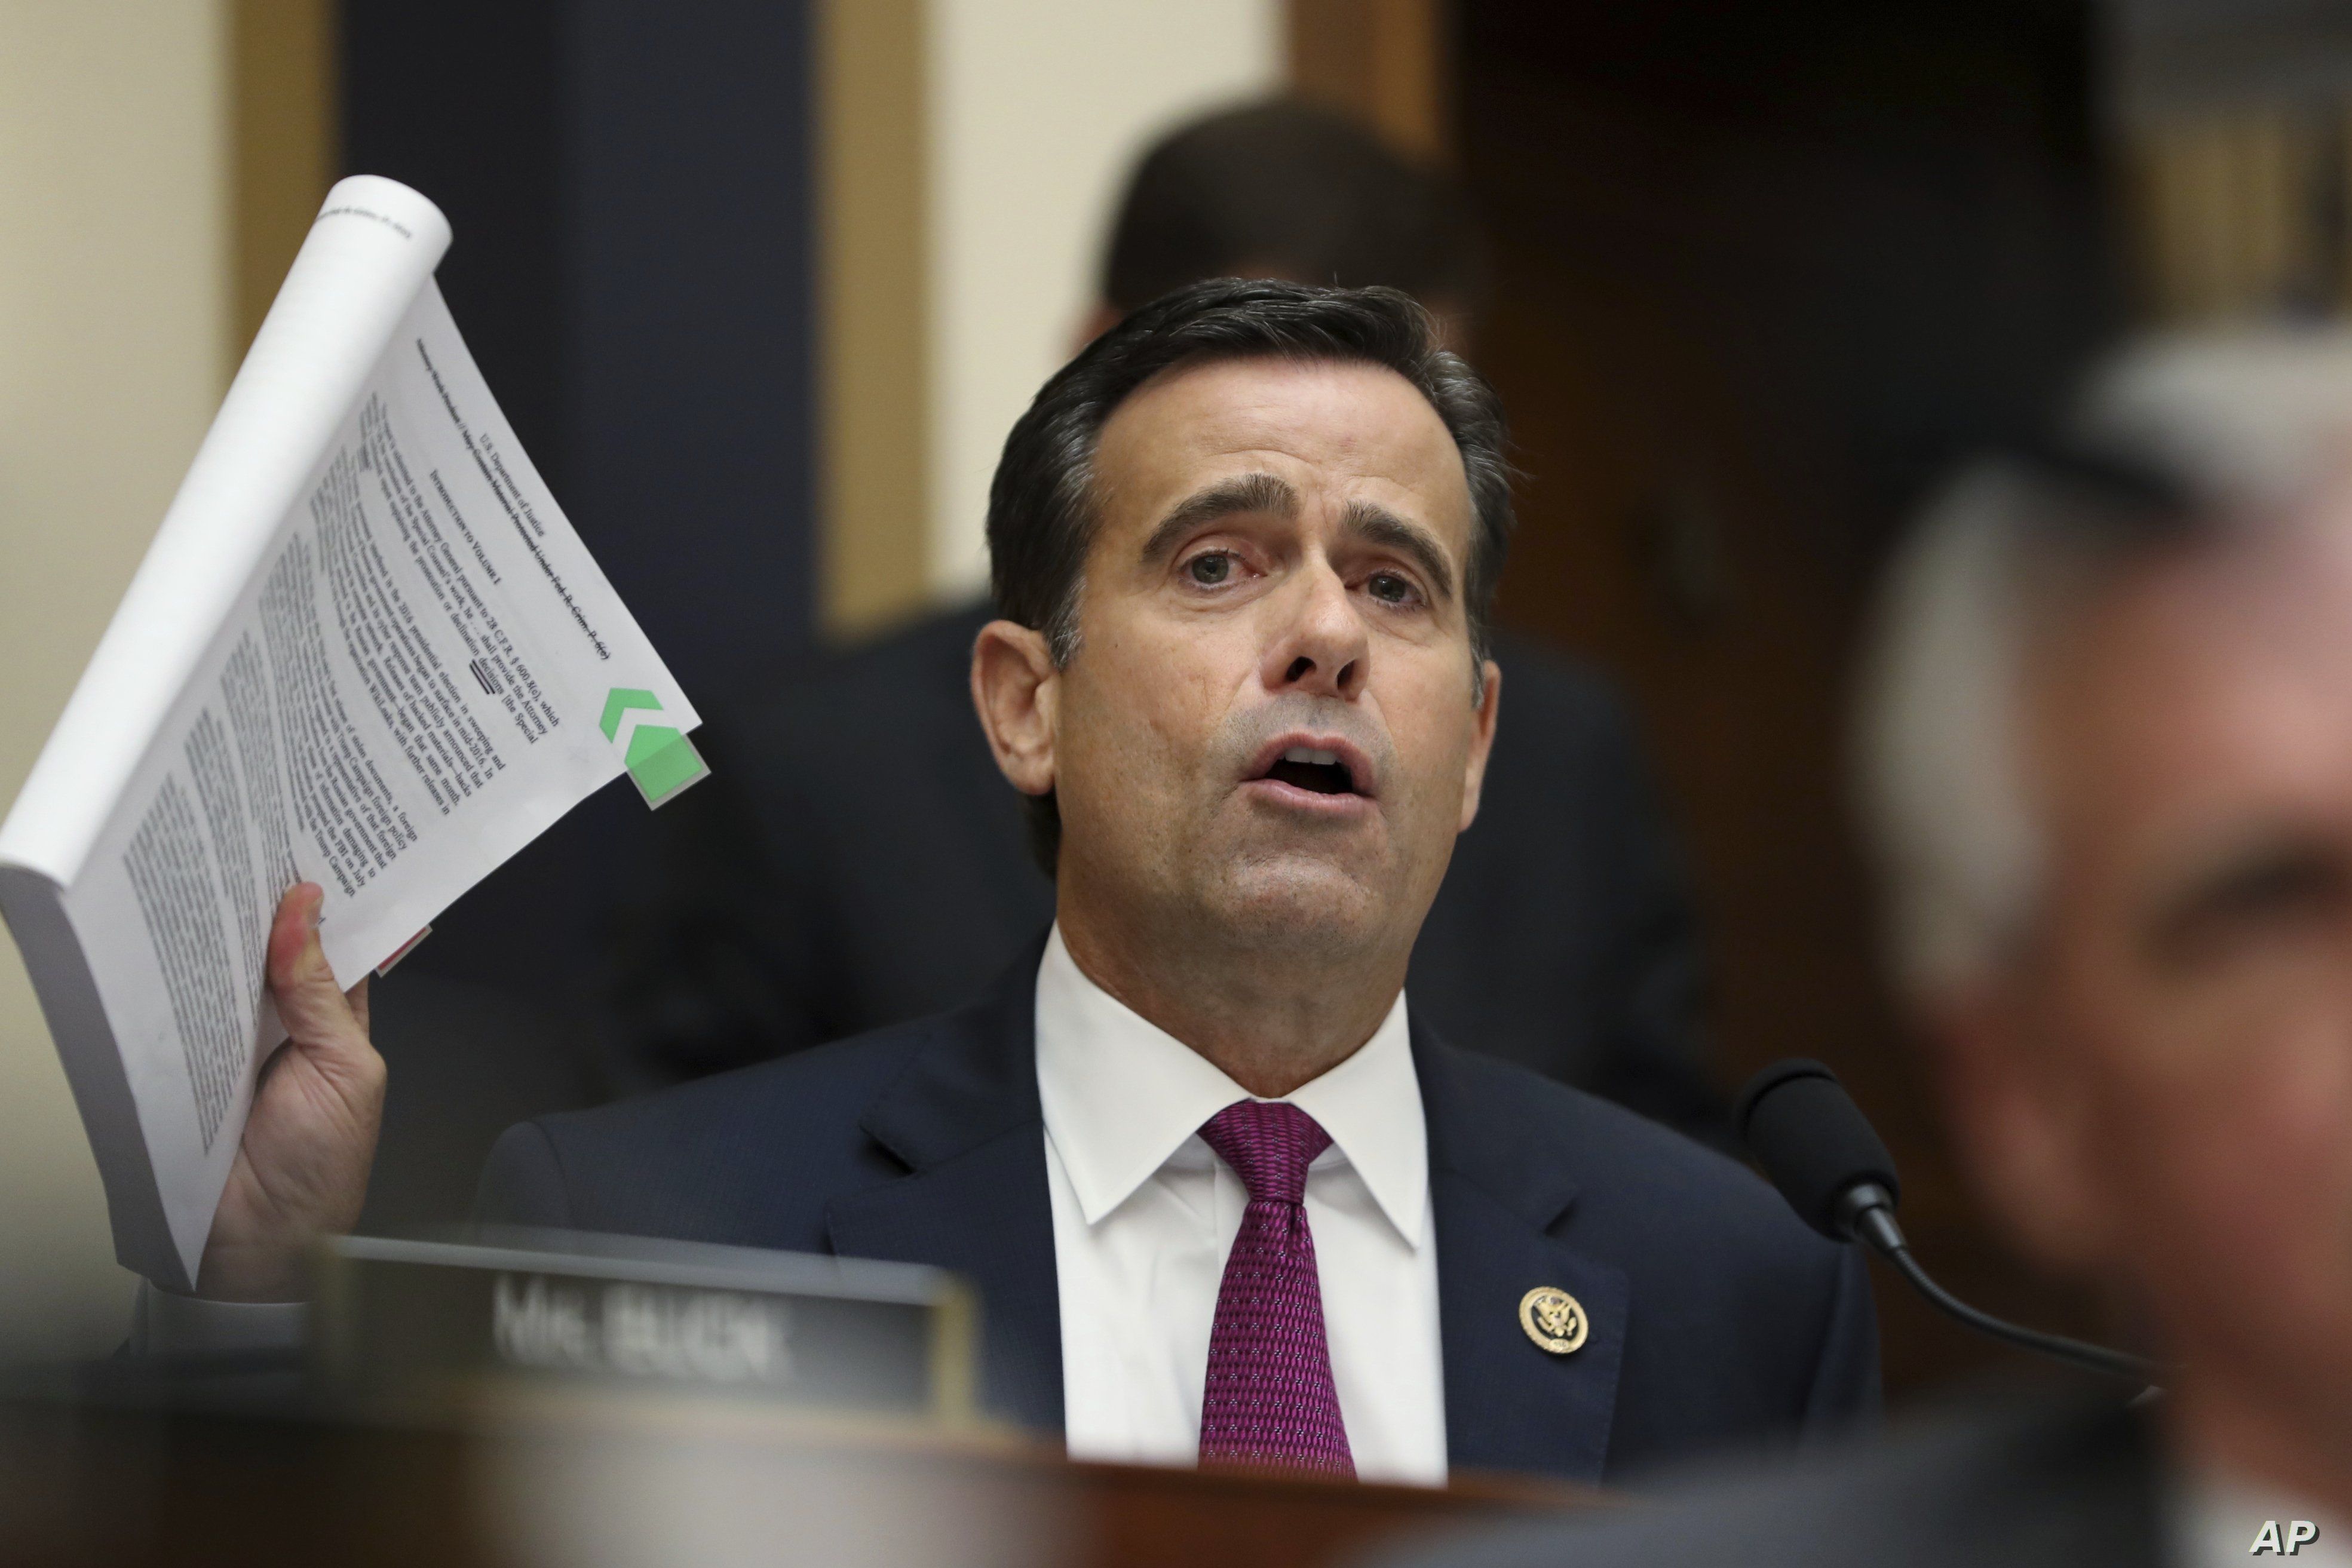 Republican Congressman John Ratcliffe poses questions to former special counsel Robert Mueller, as he testifies before the House Judiciary Committee on his report on Russian election interference, on Capitol Hill, in Washington, July 24, 2019.